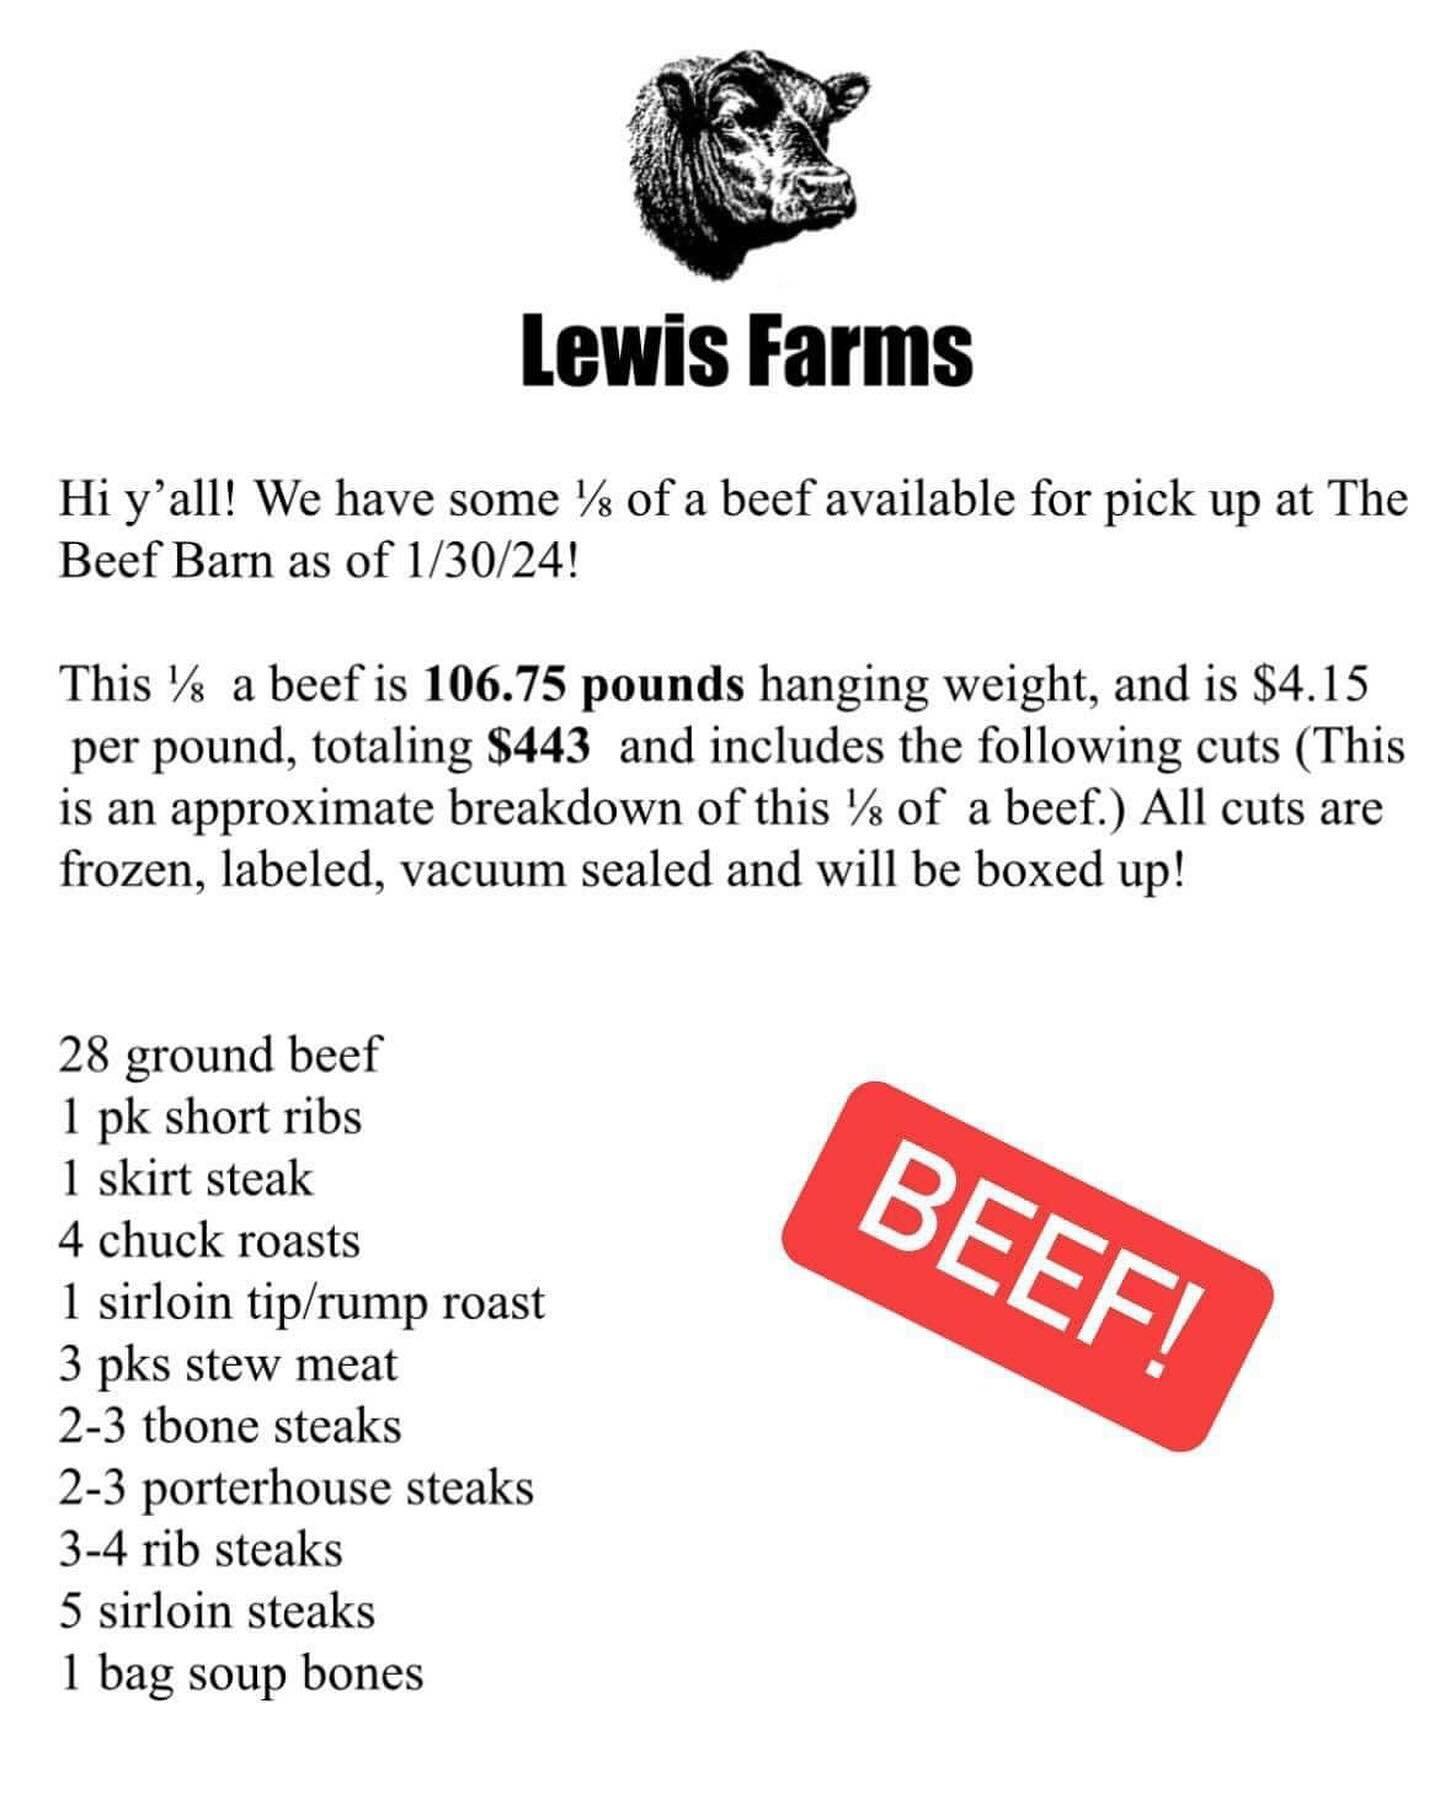 Placing your cutting order for custom freezer beef or pork intimidating to ya?😟

No worries we got you😘

We have ⭐️PRE CUT⭐️ beef and pork available for pickup at The Beef Barn! 

We currently have 1/4 of a pig, whole pig, and 1/8 of a beef! Check 